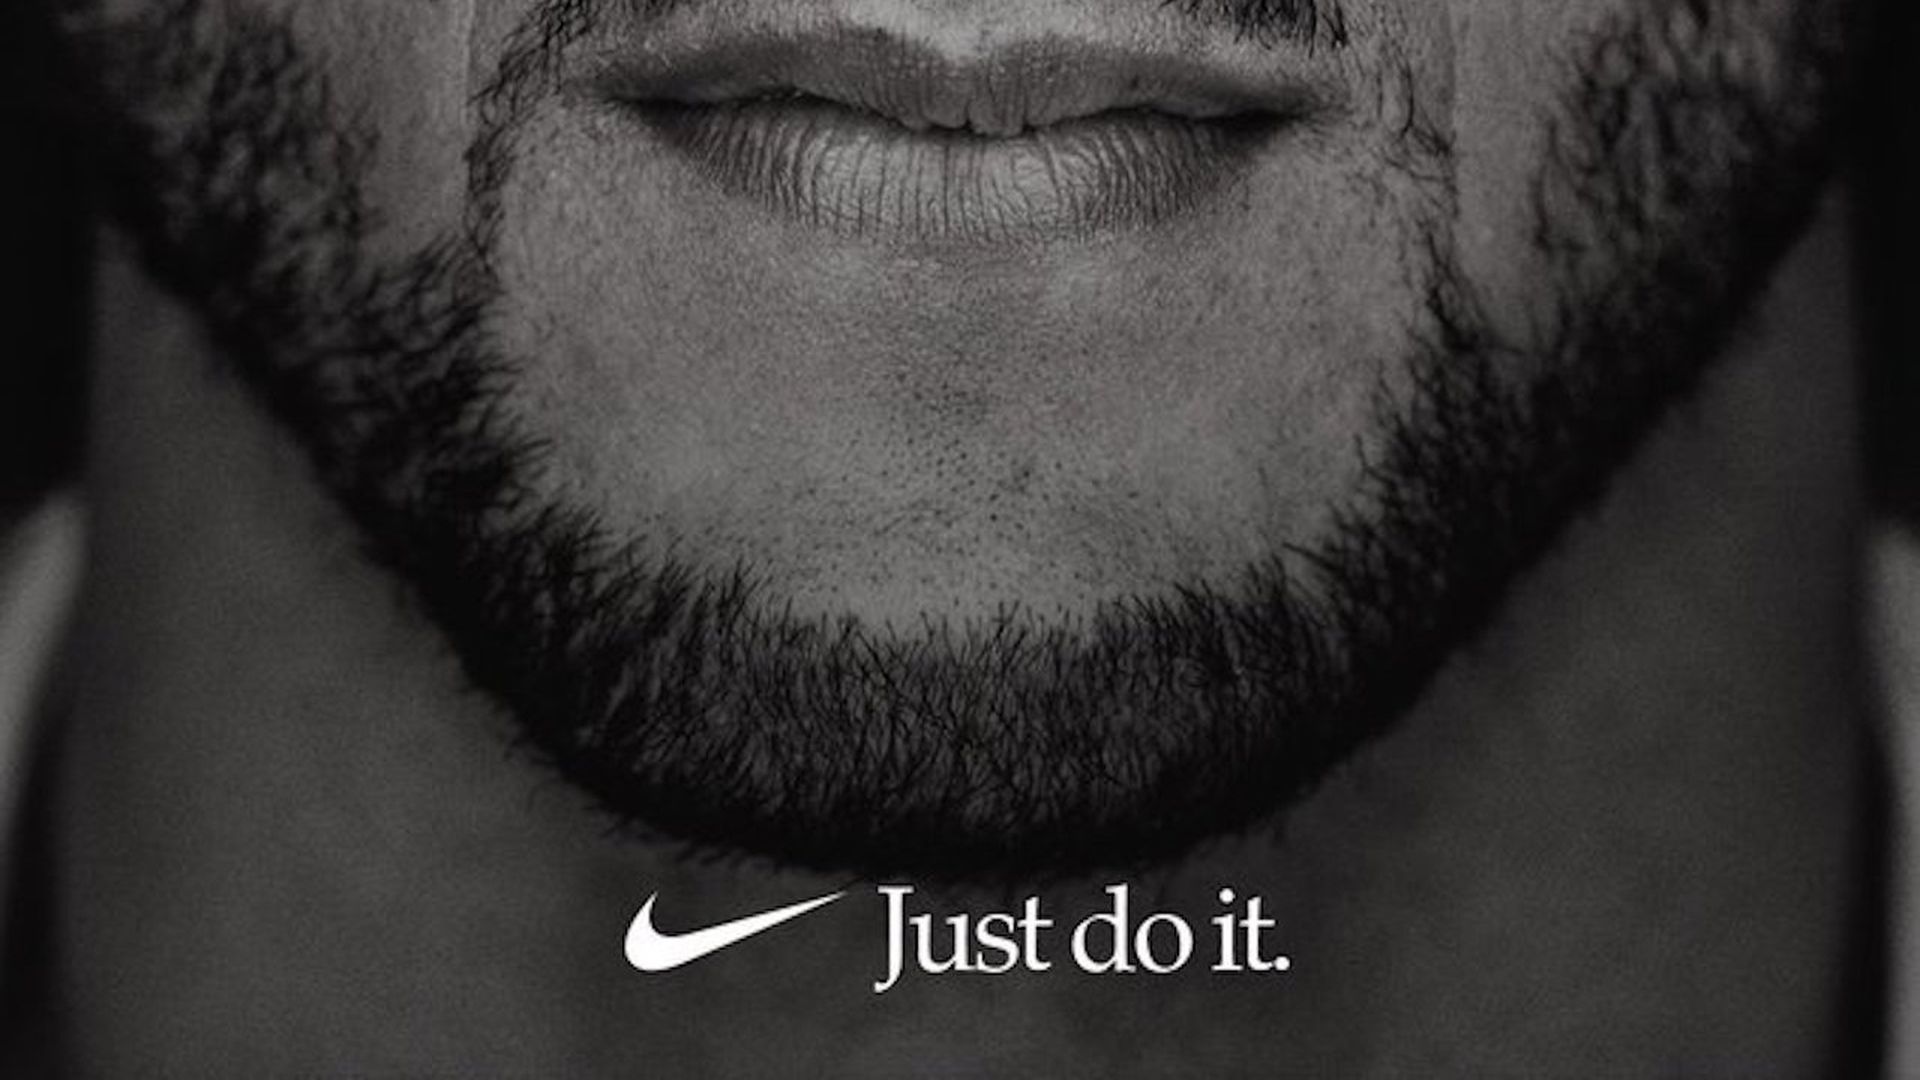 shows that Nike has plummeted with new Colin Kaepernick